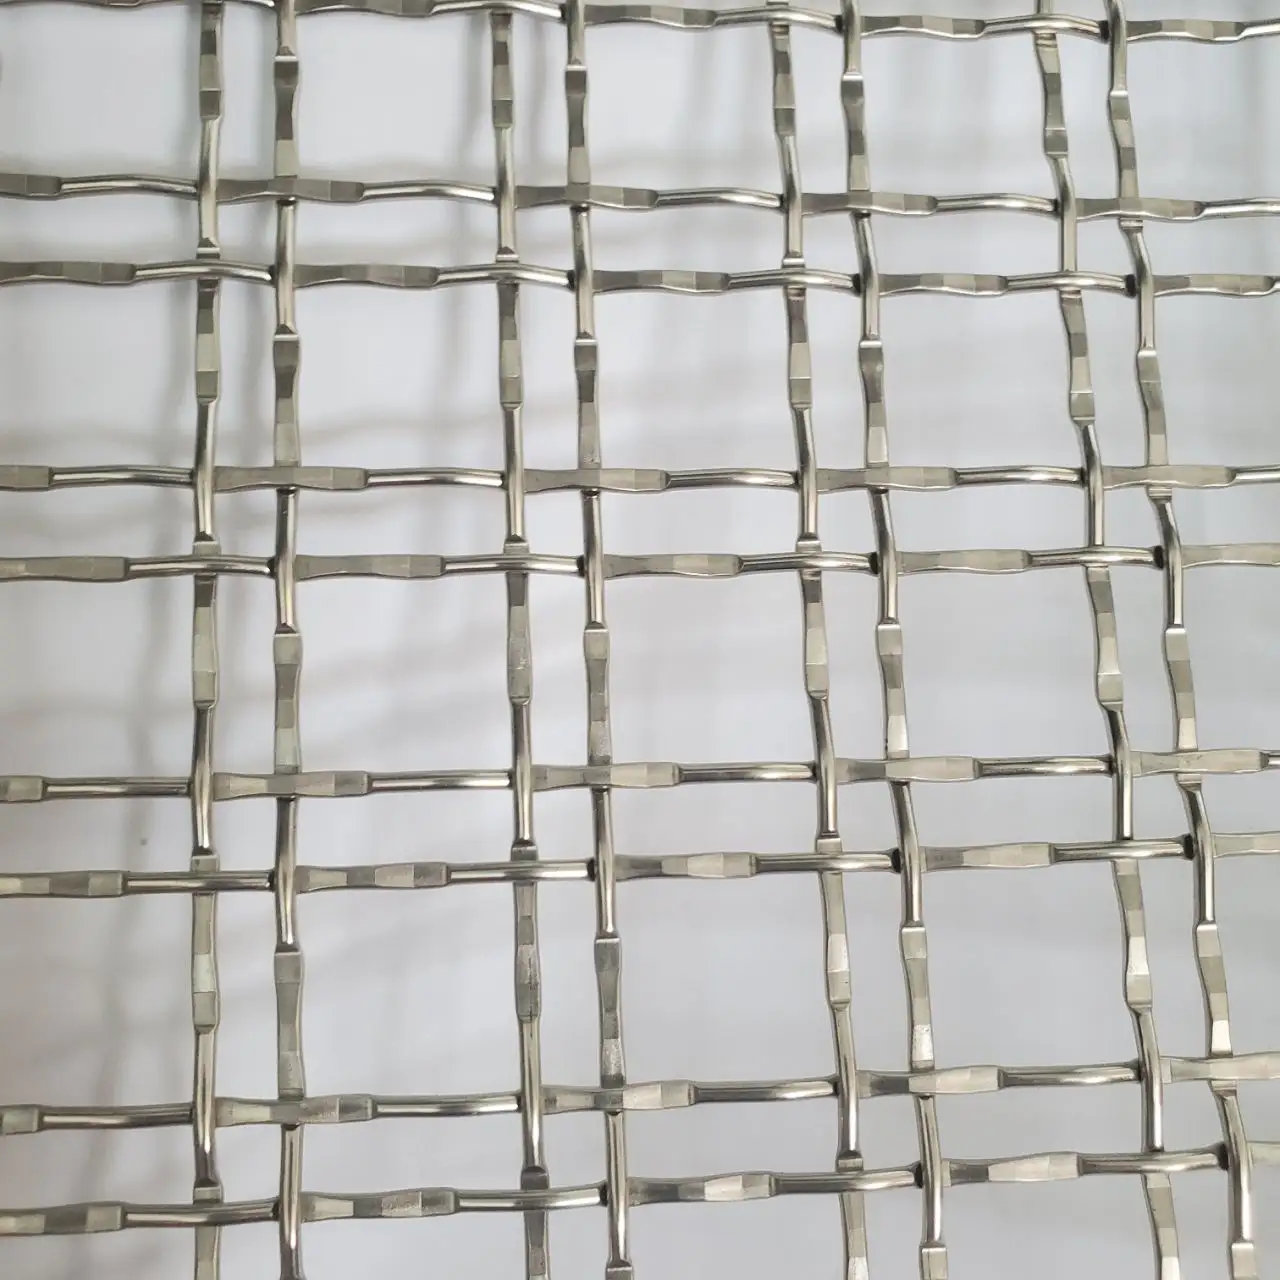 Hot Sell Factory Direct Supply Stainless Steel Metal Screens indoor Room Dividers Screens Partitions Decorative Wire Mesh